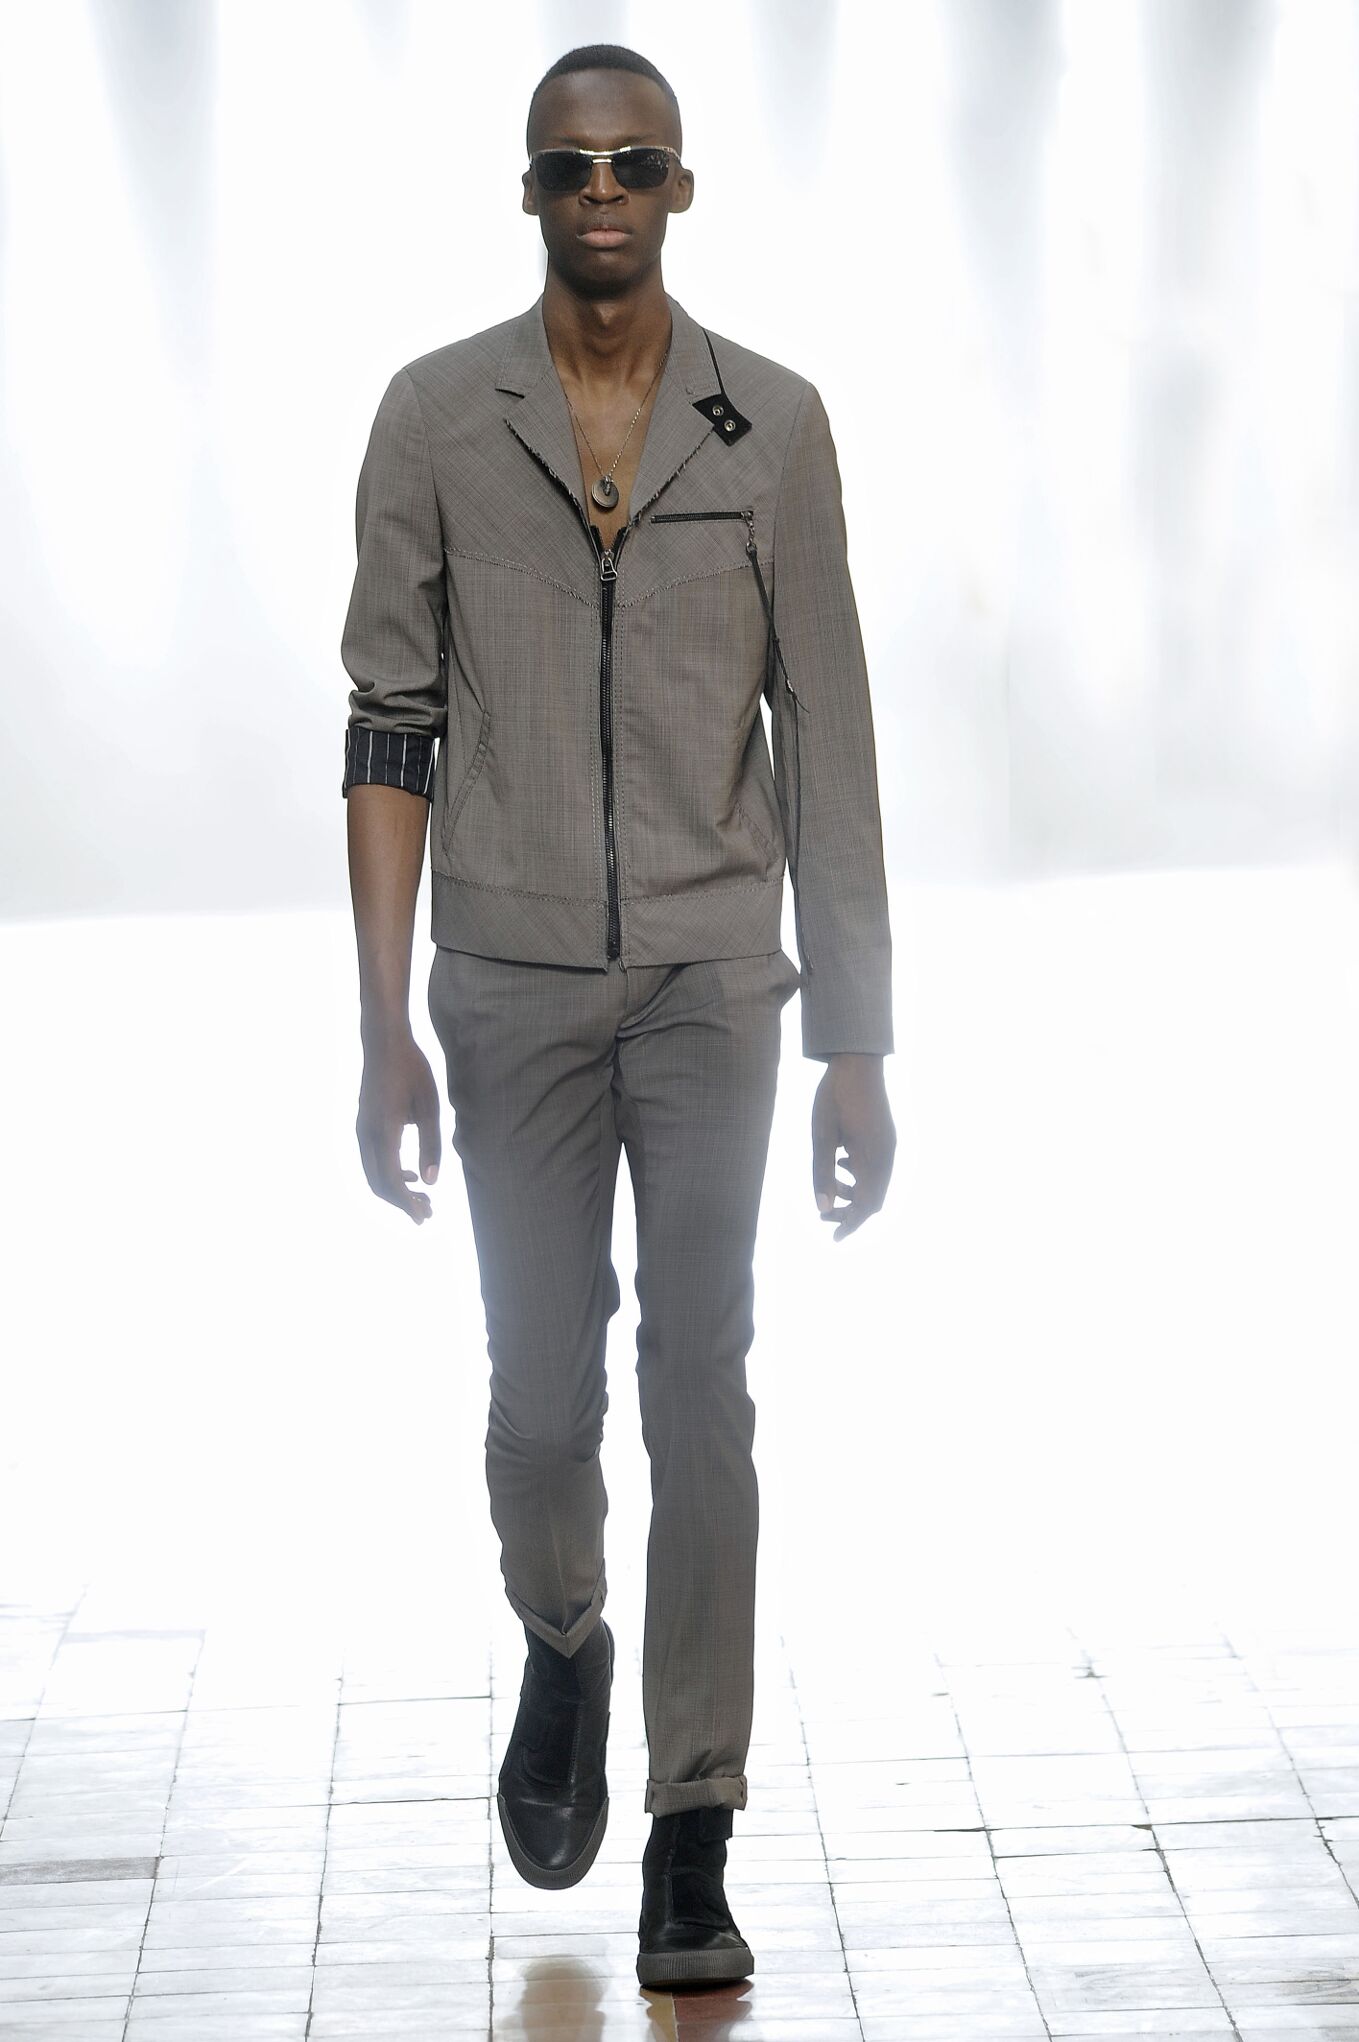 LANVIN SPRING SUMMER 2016 MEN’S COLLECTION | The Skinny Beep